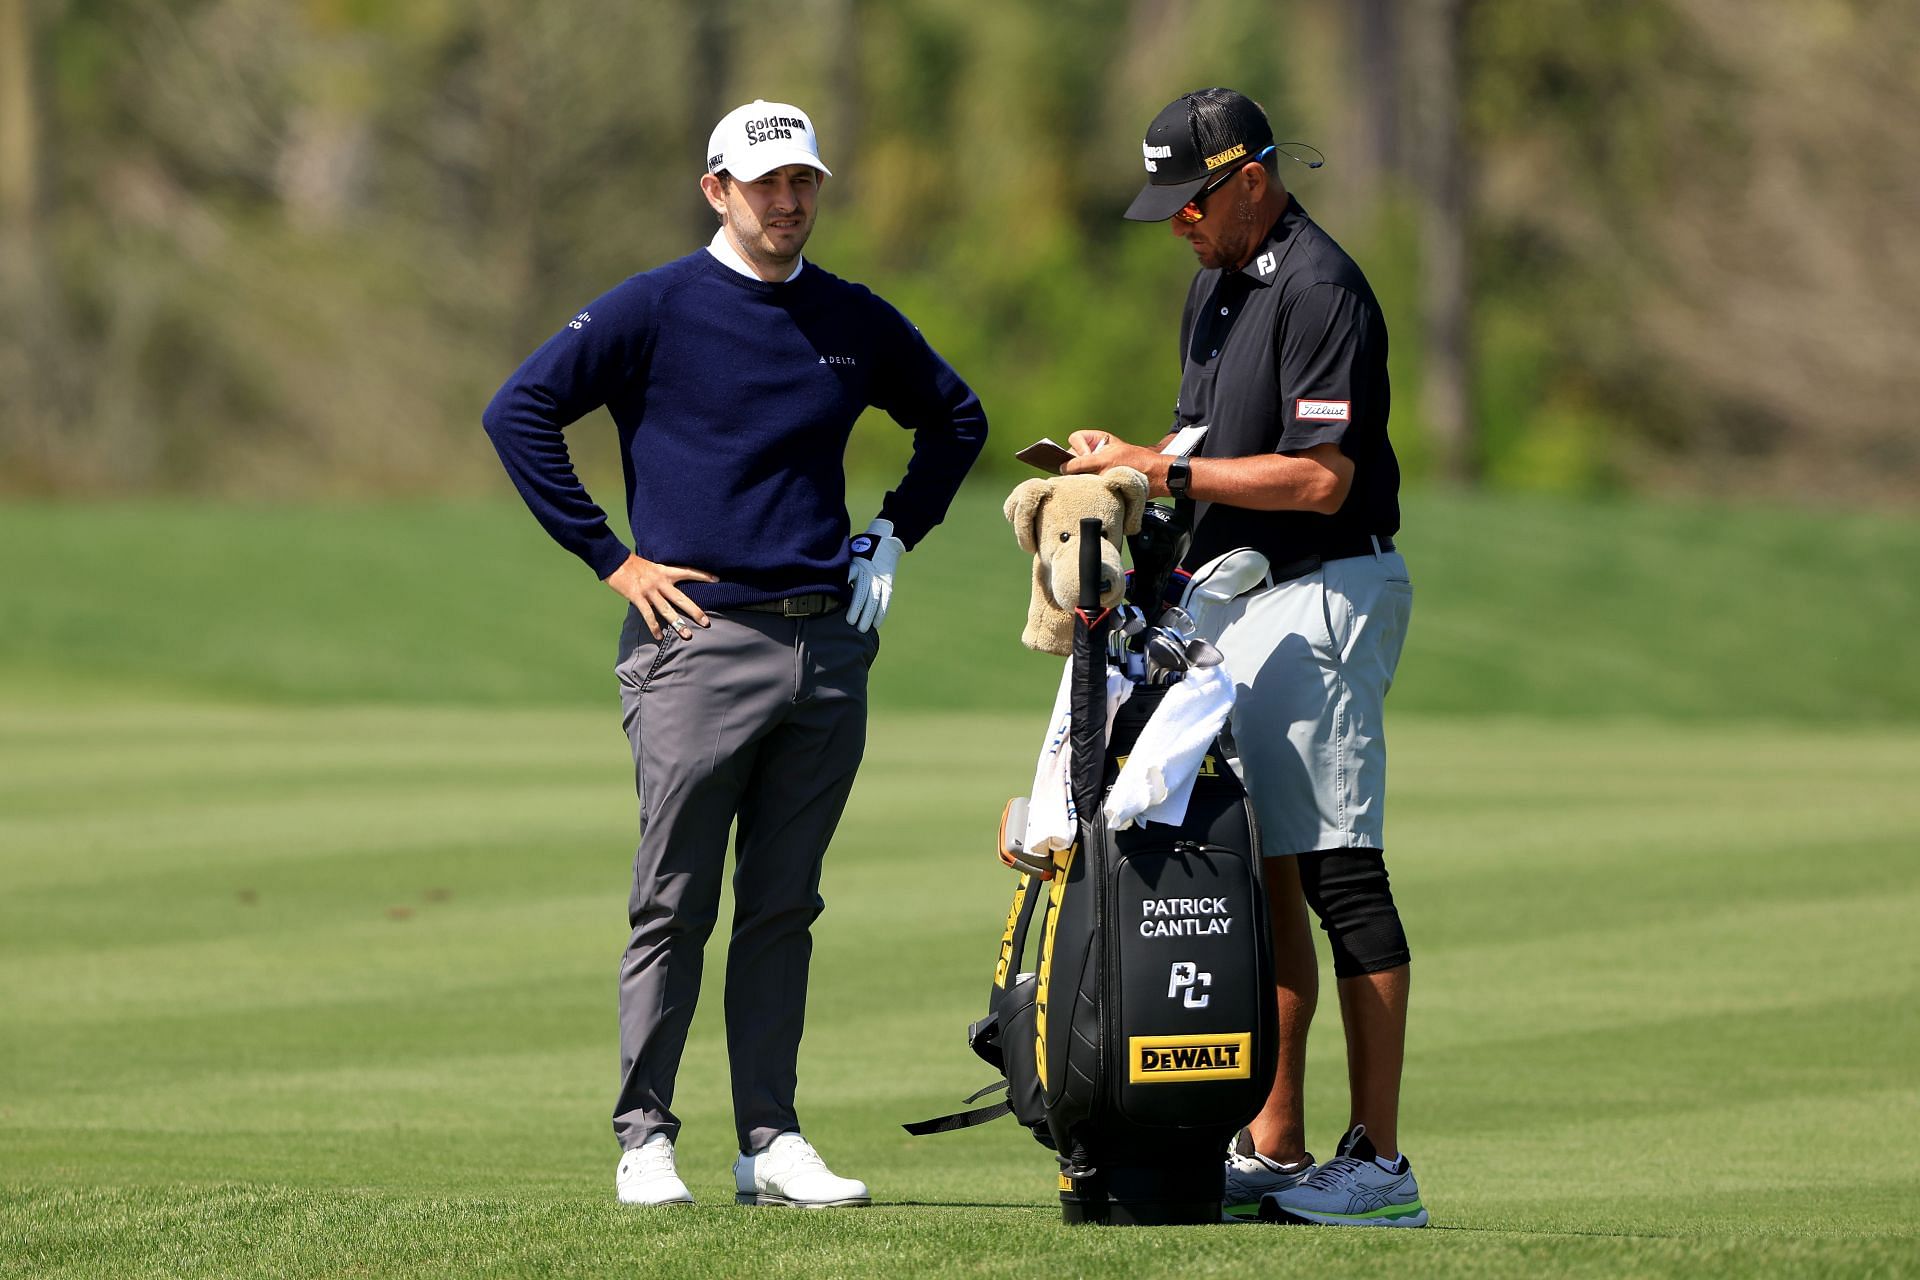 : Patrick Cantlay of the United States with caddie Matt Minister during the pro-am prior to The Genesis Invitational at Riviera Country Club in 2023 in Pacific Palisades, California. (Photo by Cliff Hawkins/Getty Images)